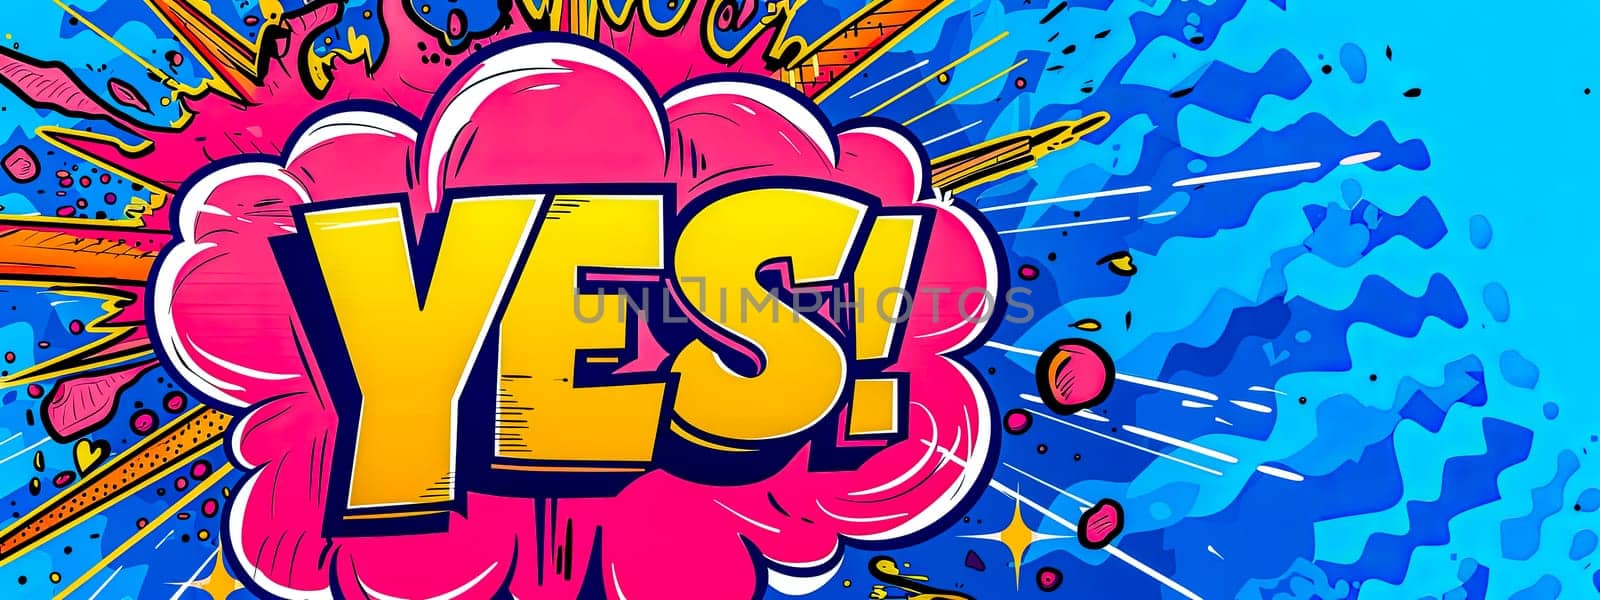 Dynamic pop art explosion featuring the word yes! in a bright, comic book style